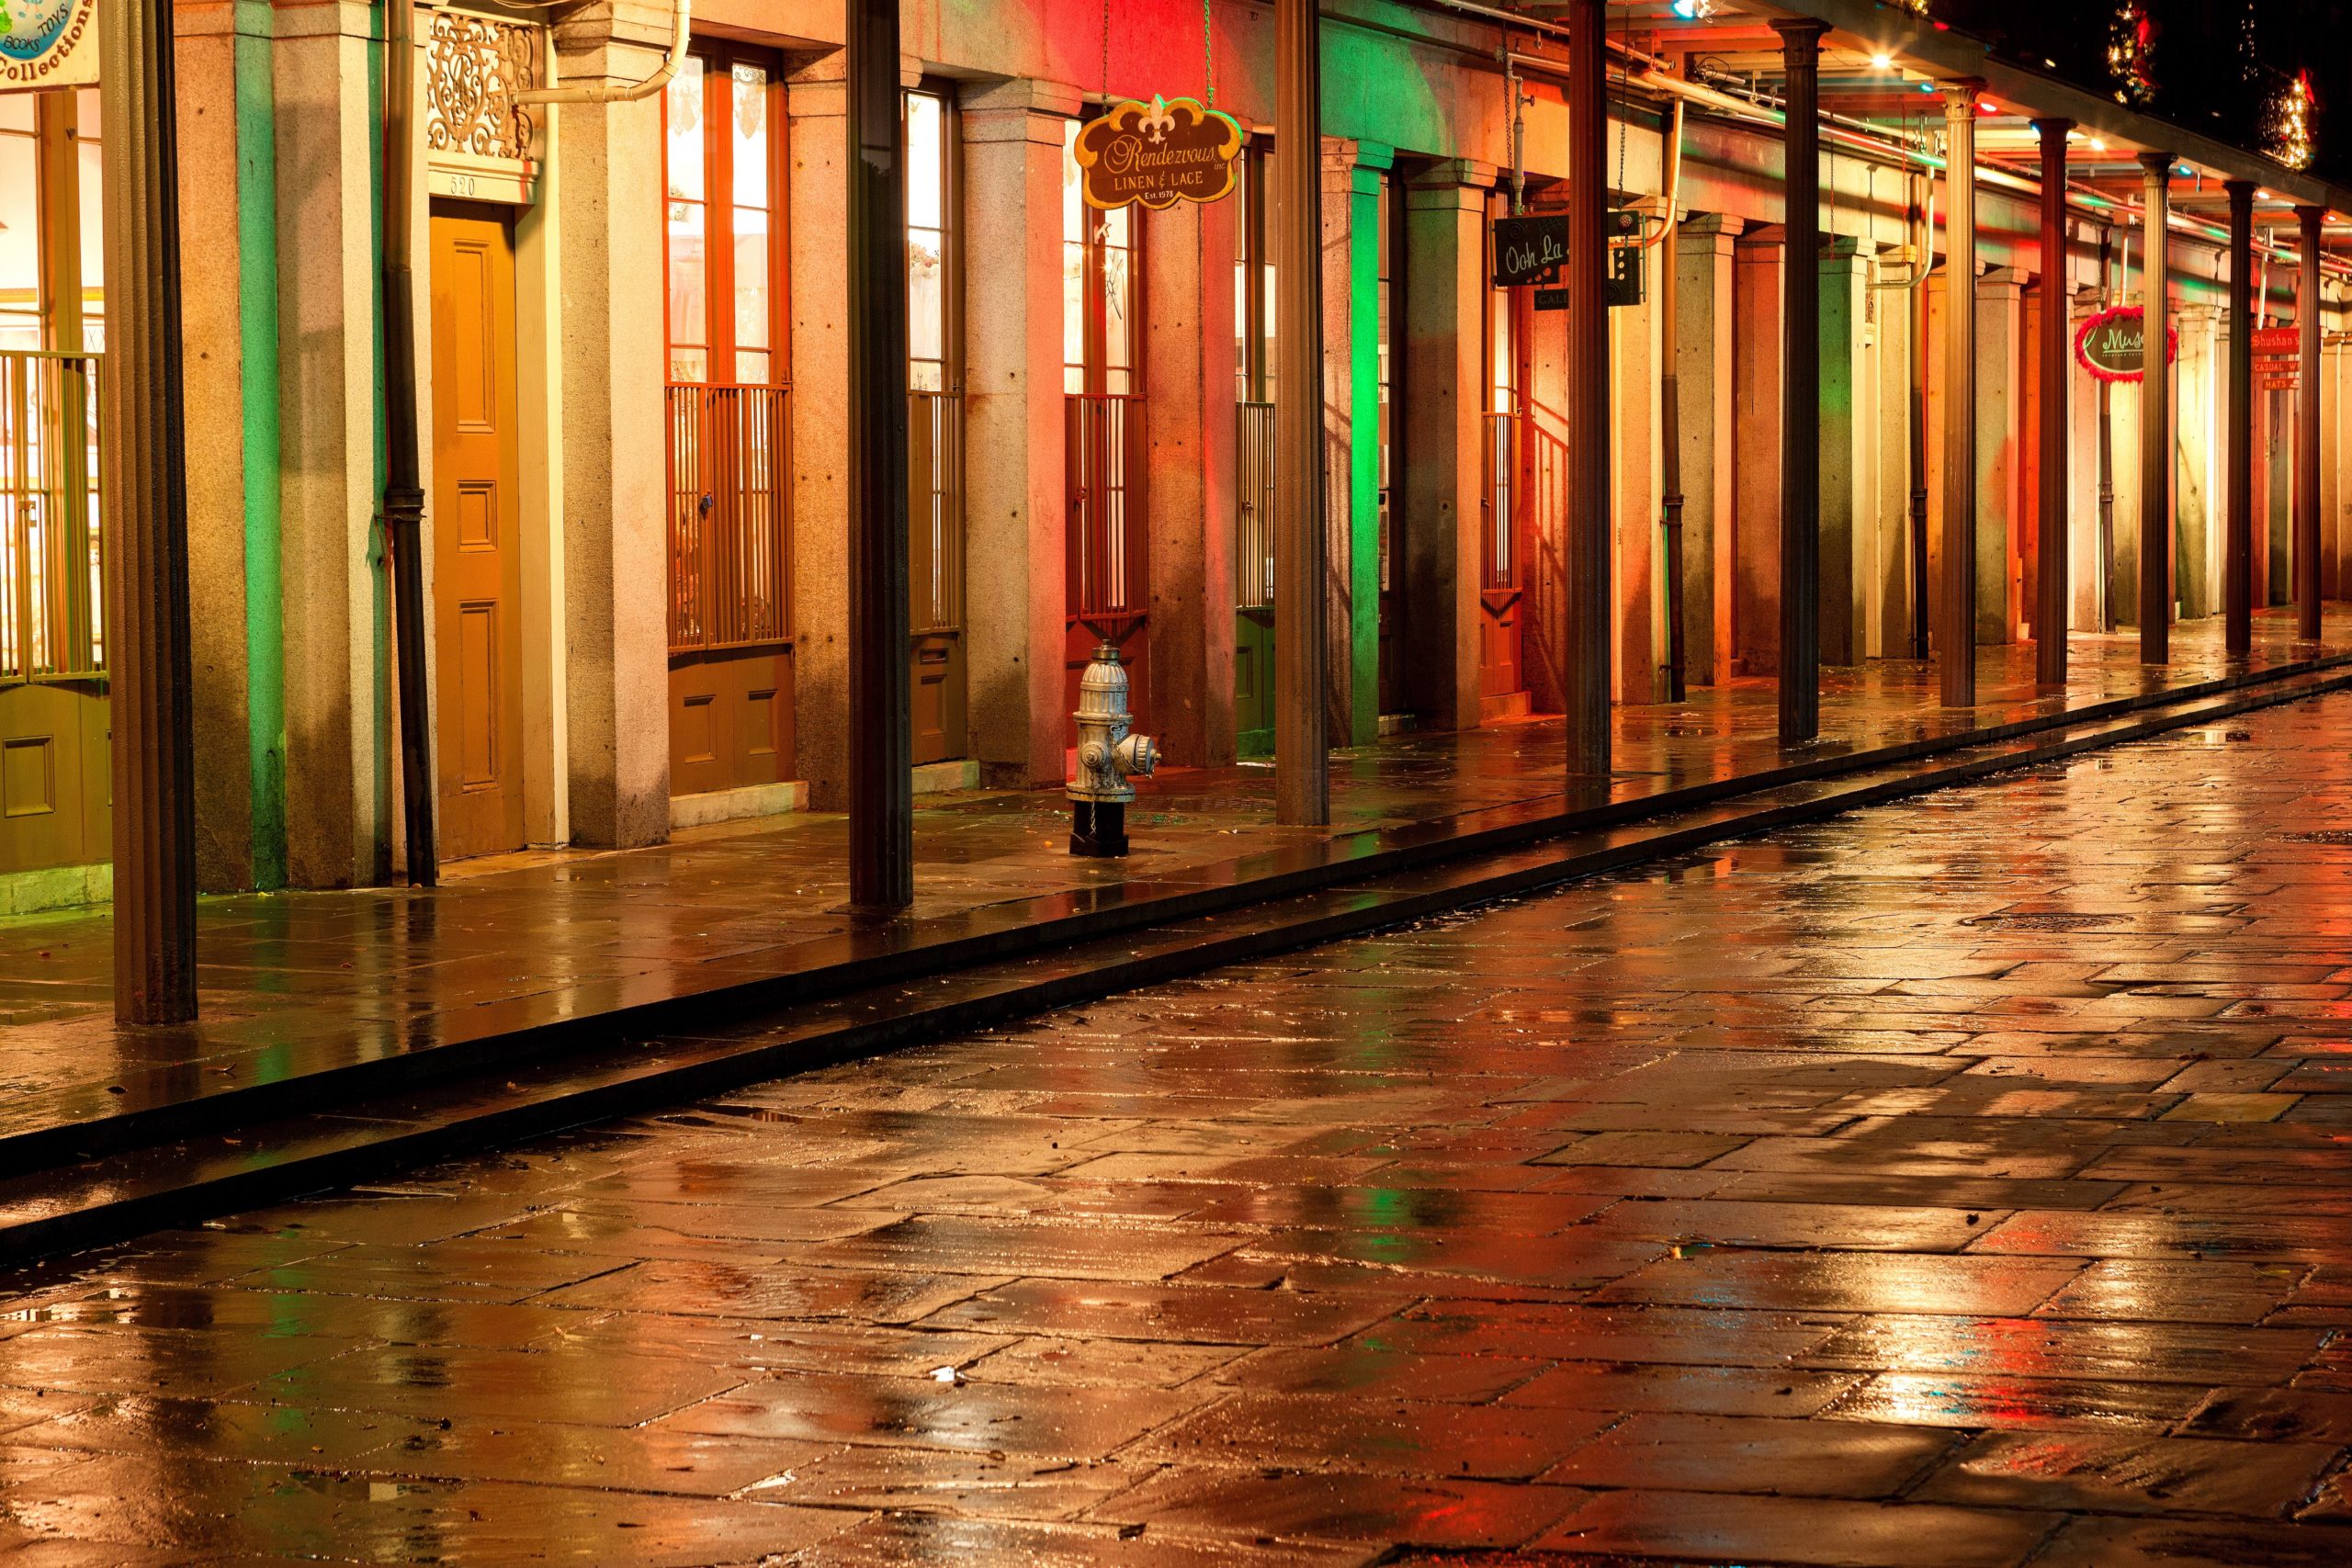 Reflections of holiday lights at night after a brief rainstorm, New Orleans French Quarter.